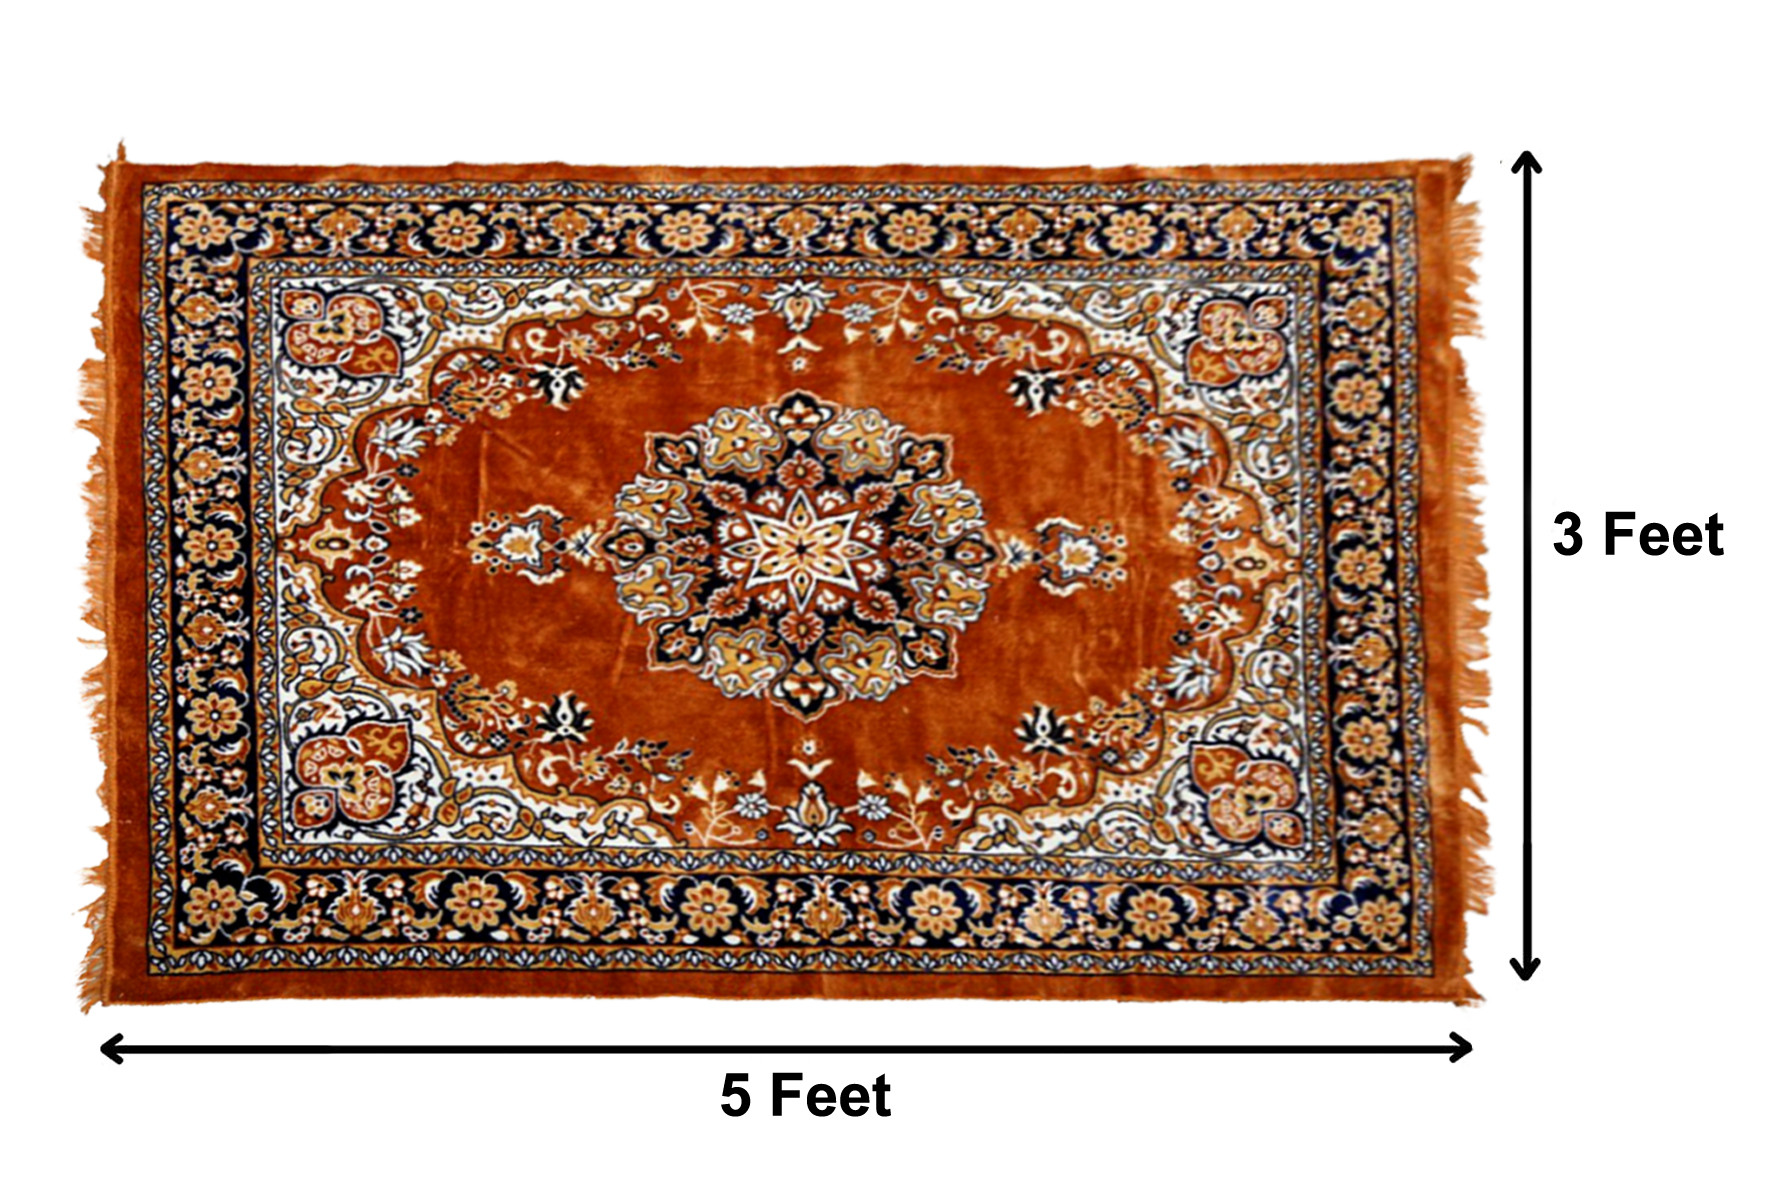 Kuber Industries Heavy Floral Design Super Soft Area Rugs Silky Smooth Carpet for Living Room Kids Room Baby Room Dormitory Home Decor - 3 x 5 Feet (Gold)-HS_38_KUBMART20959